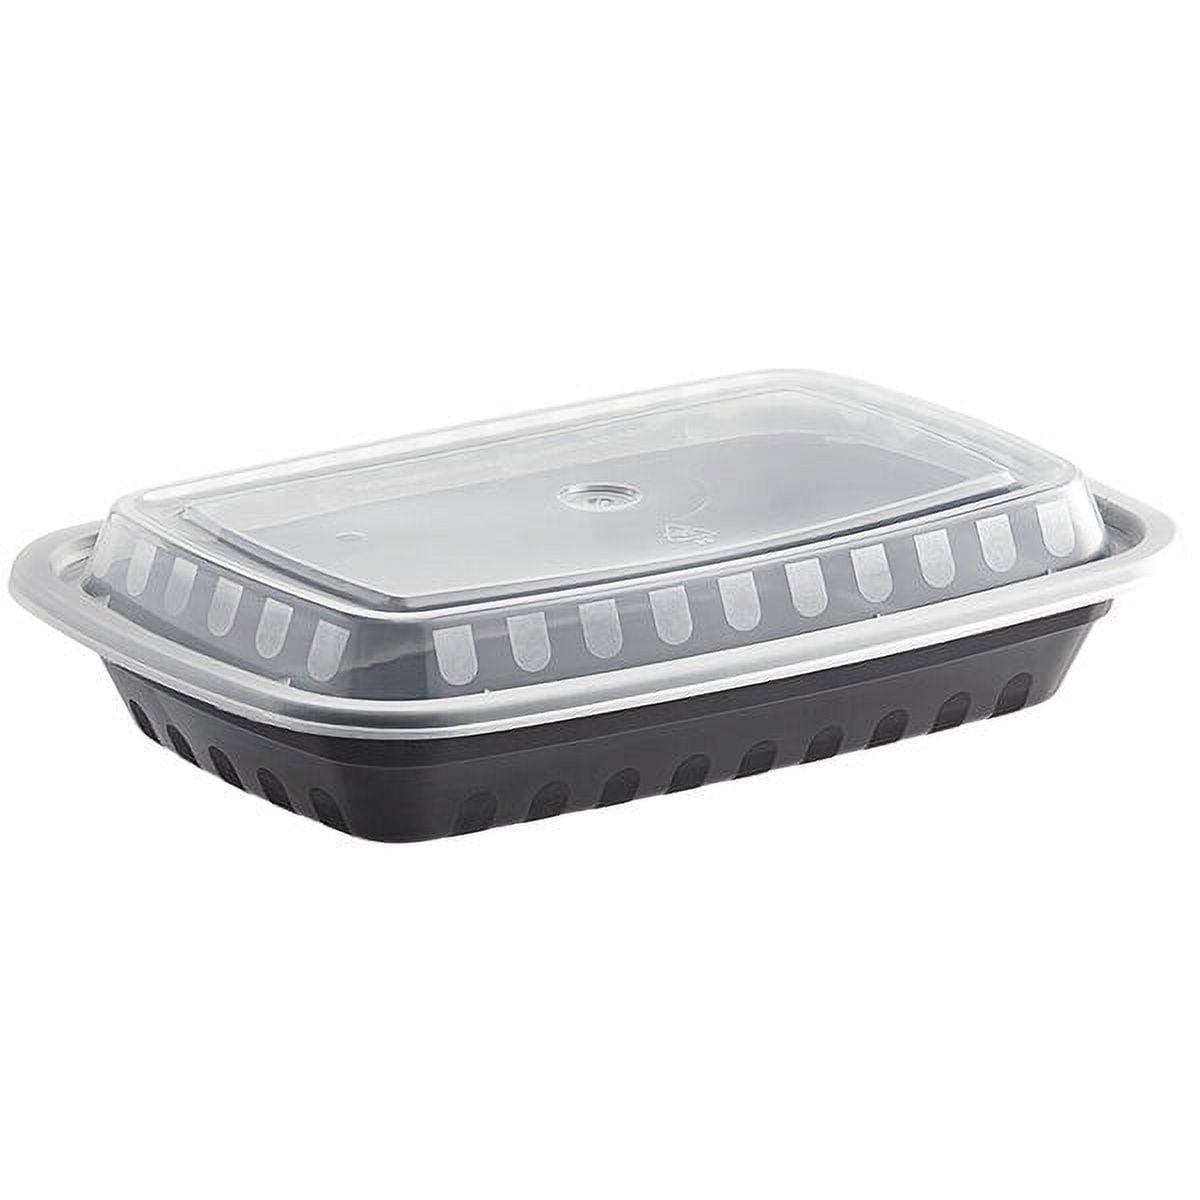 Hefty Food Storage Container with Lids (38 oz., 50 pcs.)